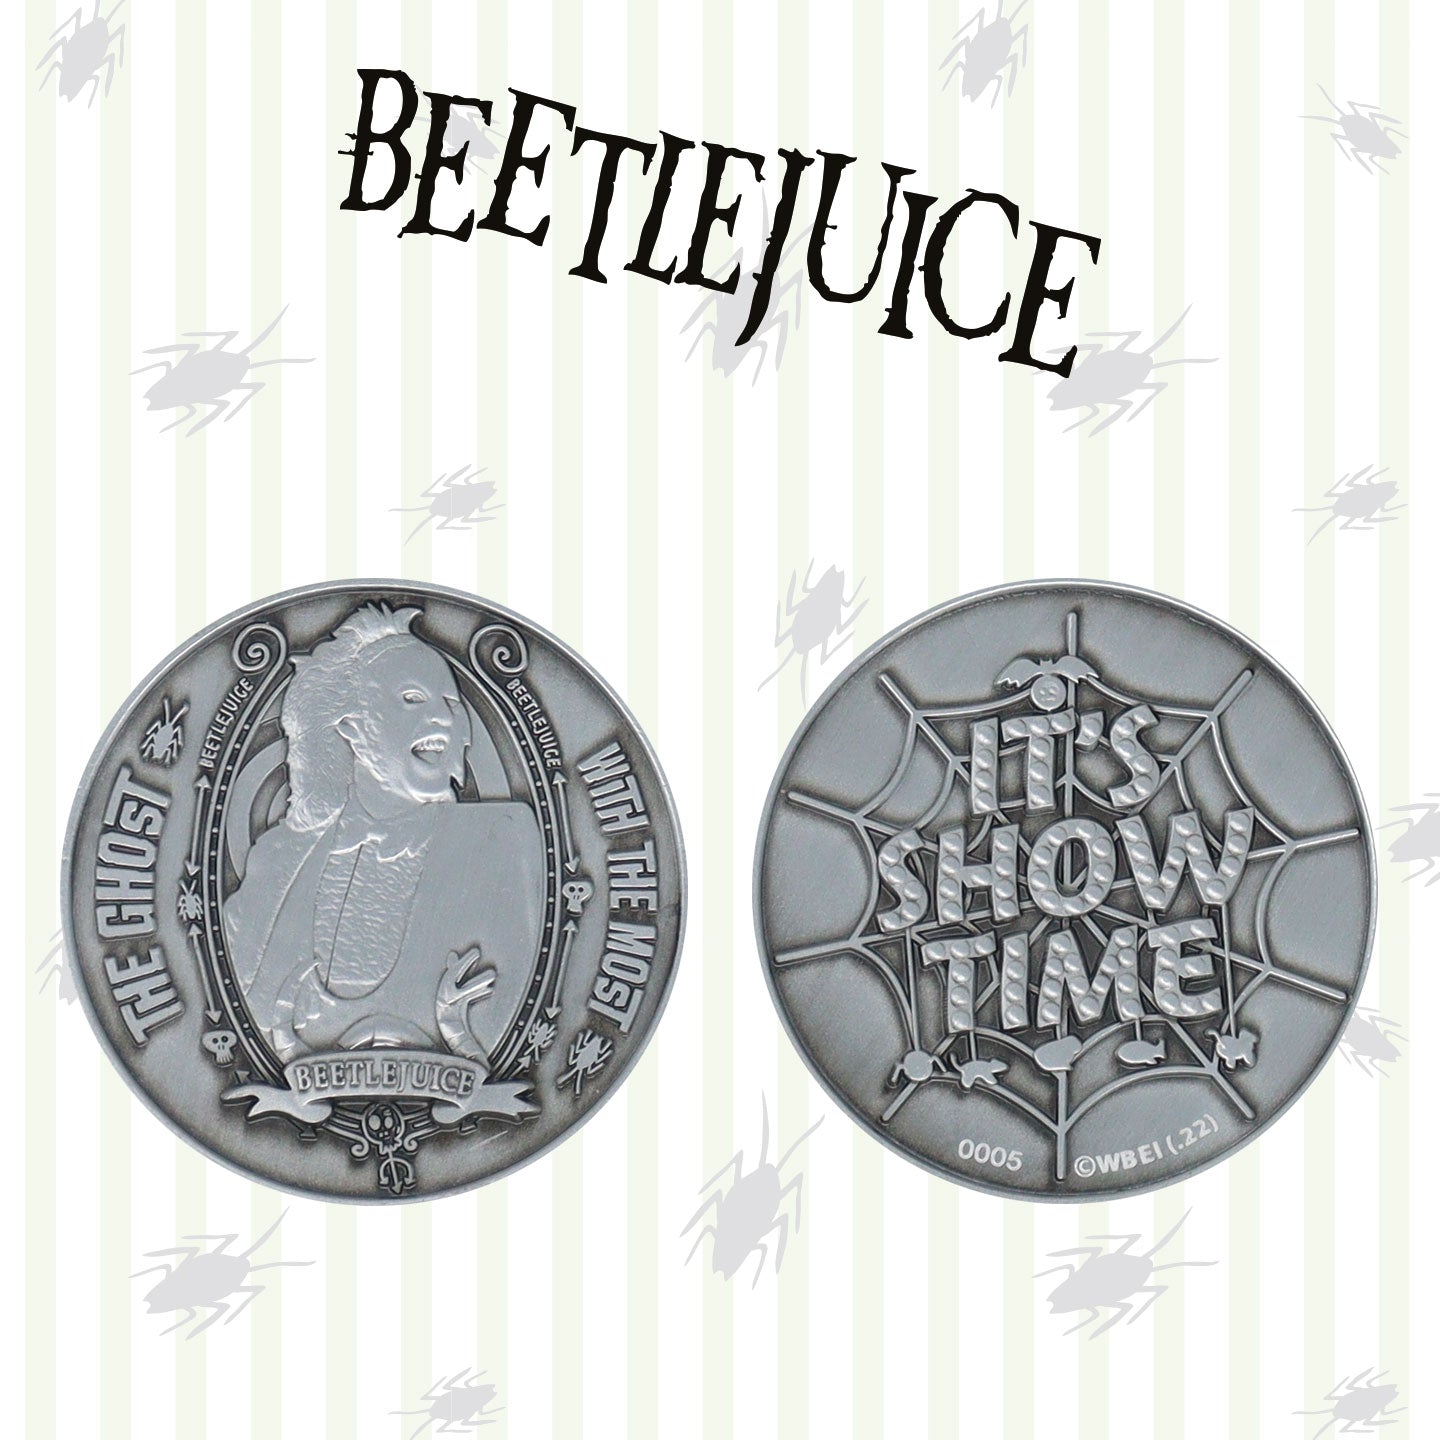 Beetlejuice Limited Edition Collectible Coin